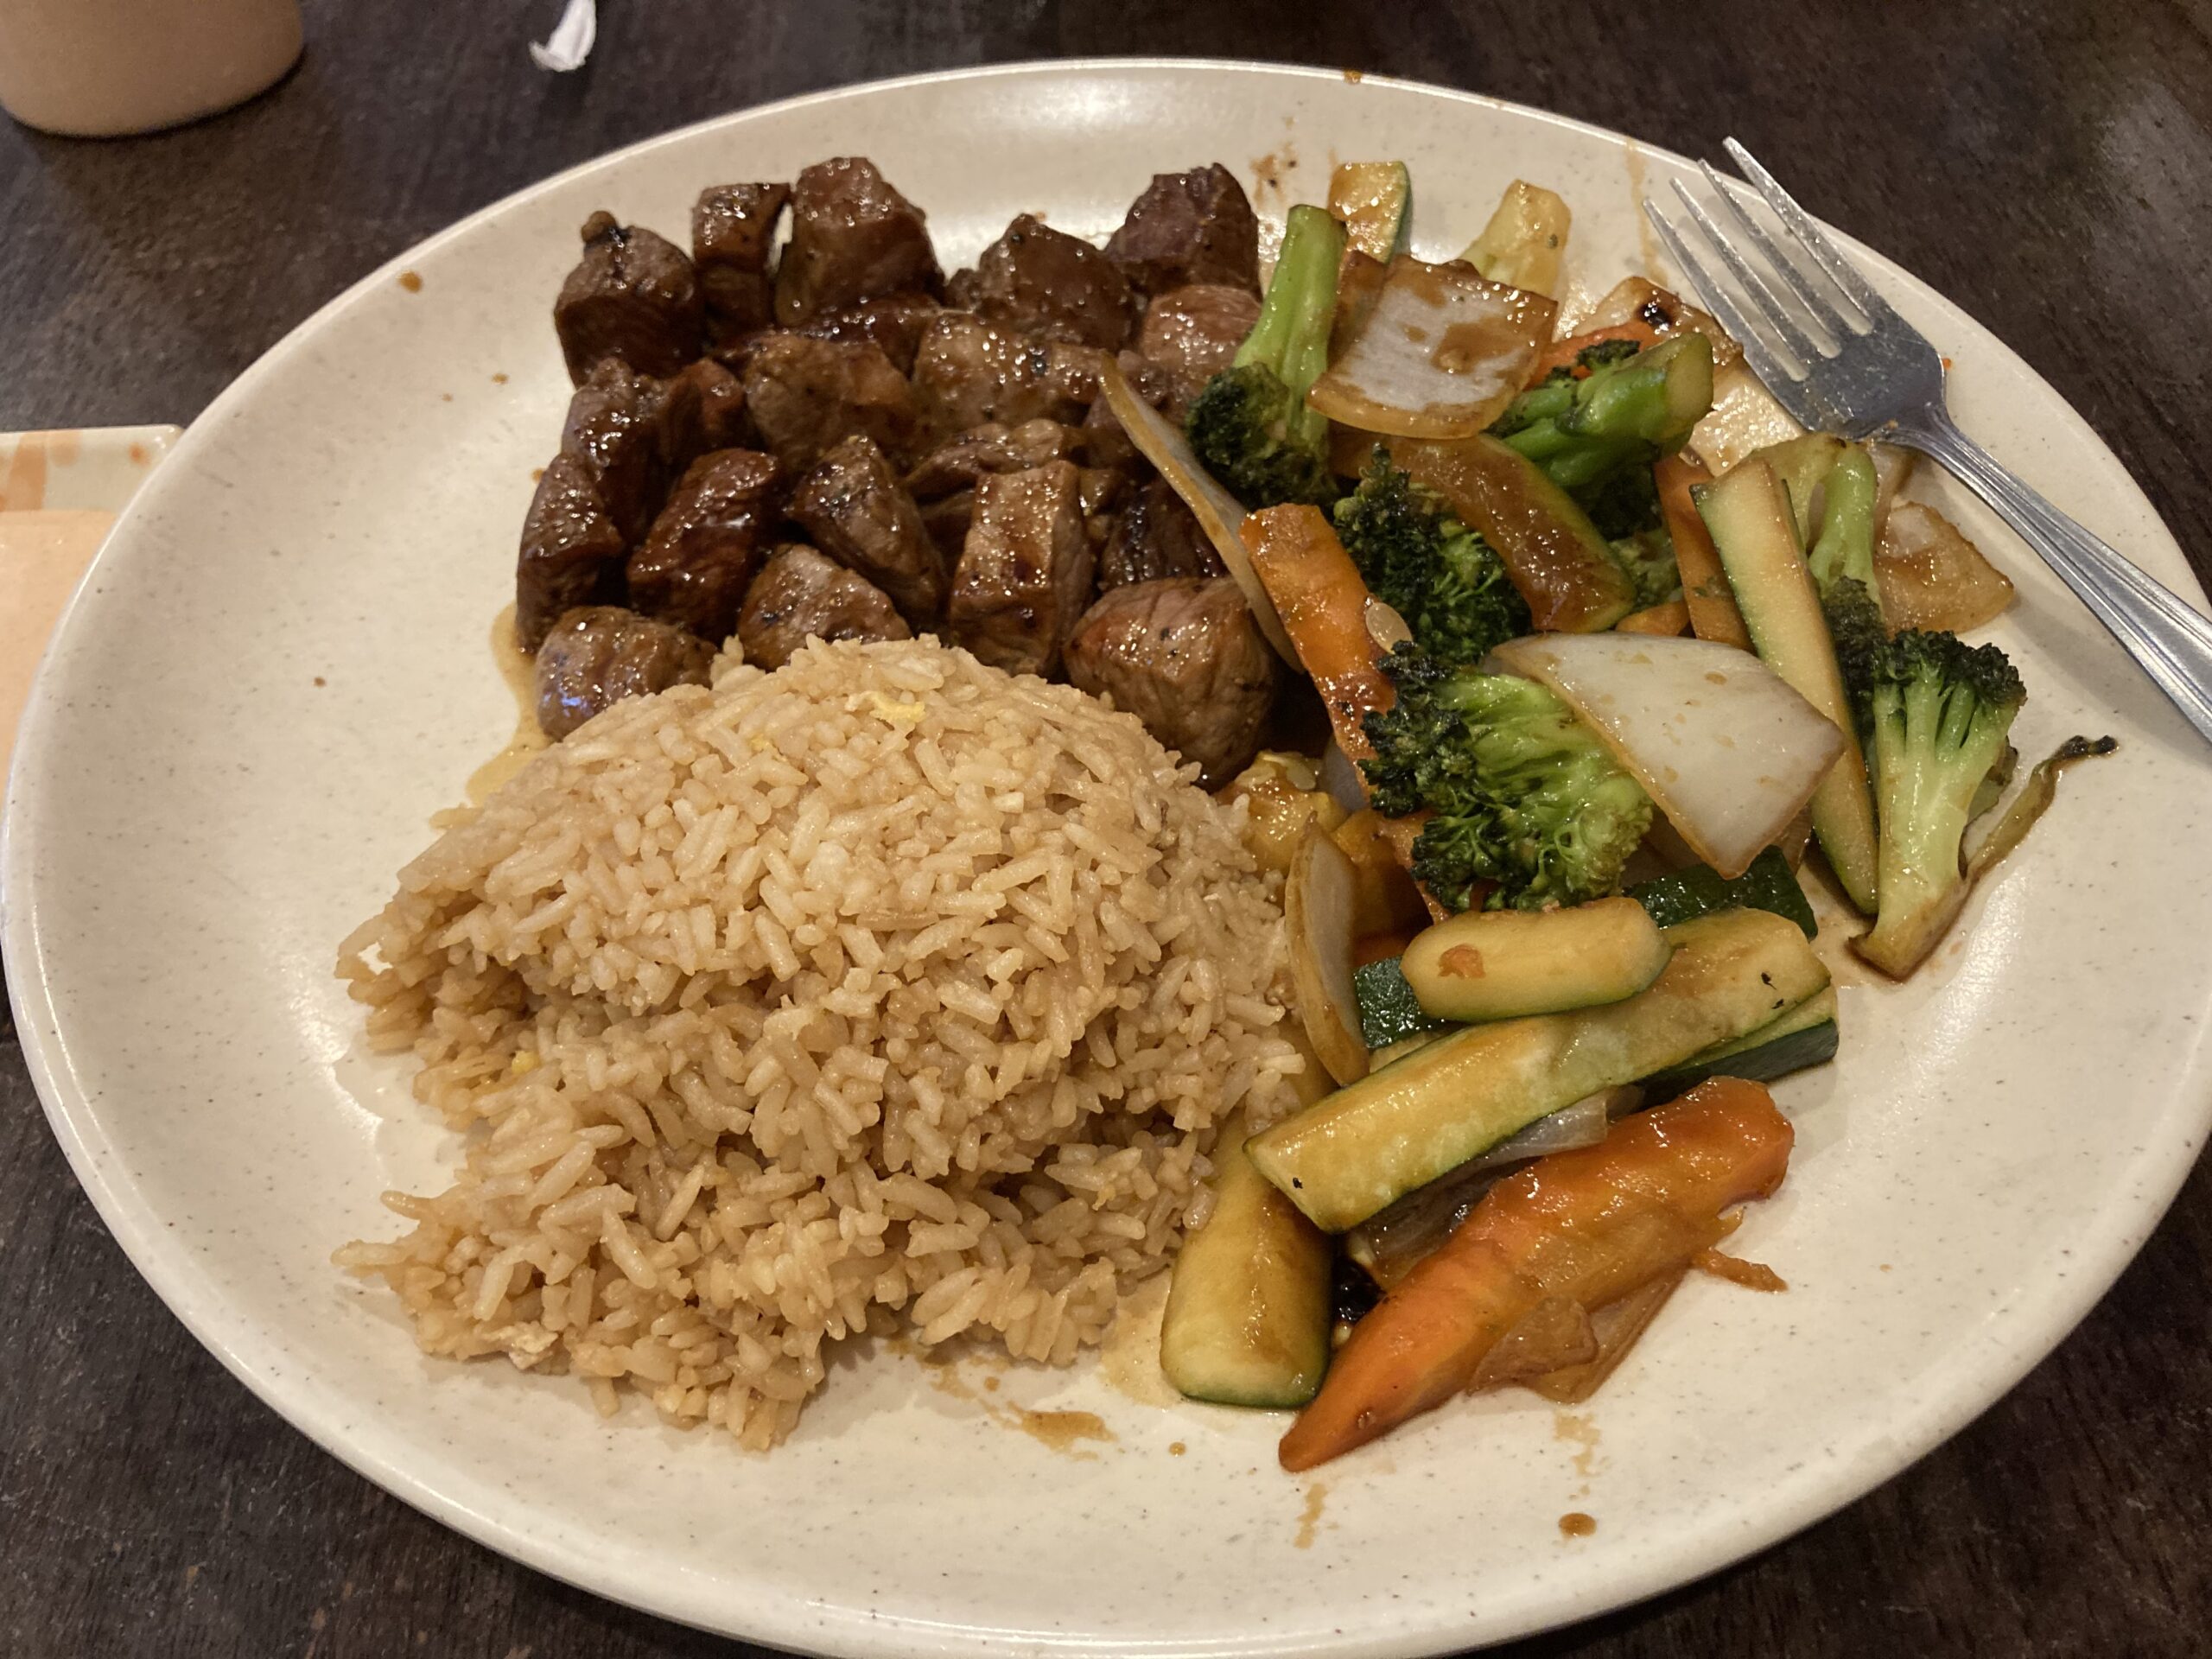 A plate with rice, mixed vegetables, and chopped steak